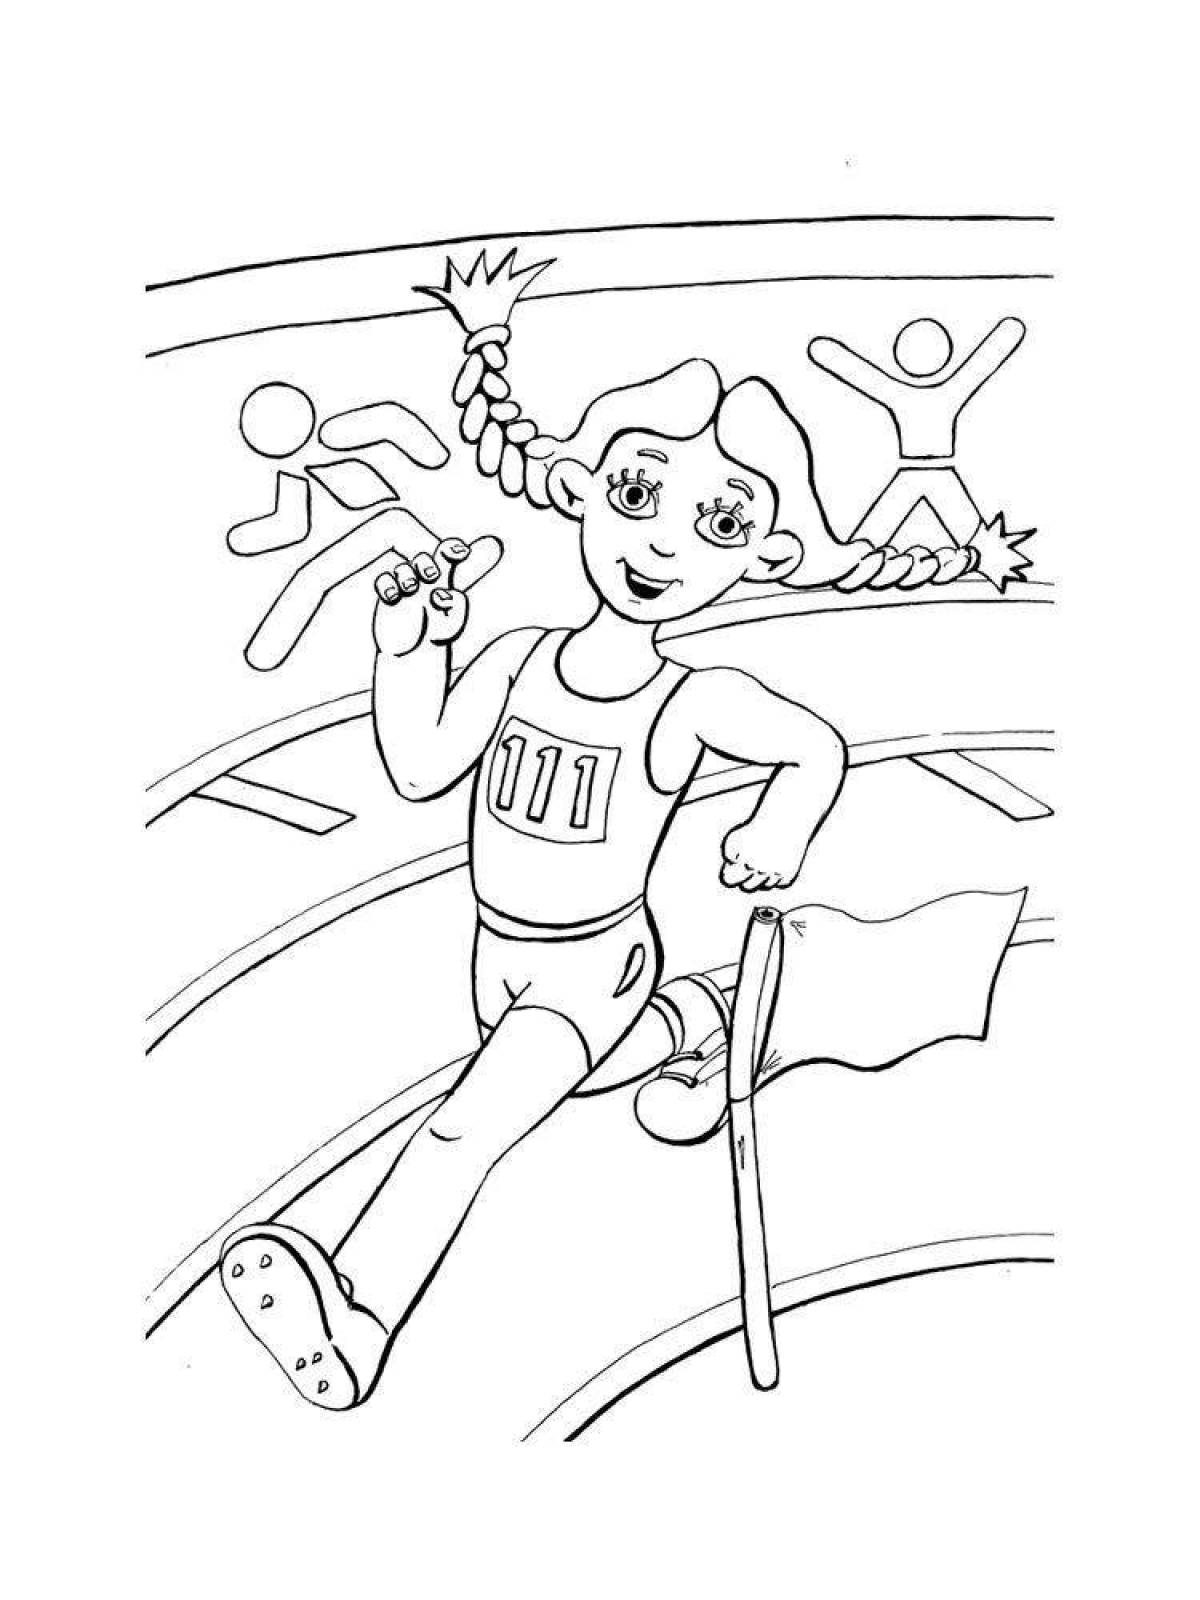 Blissful lifestyle coloring page